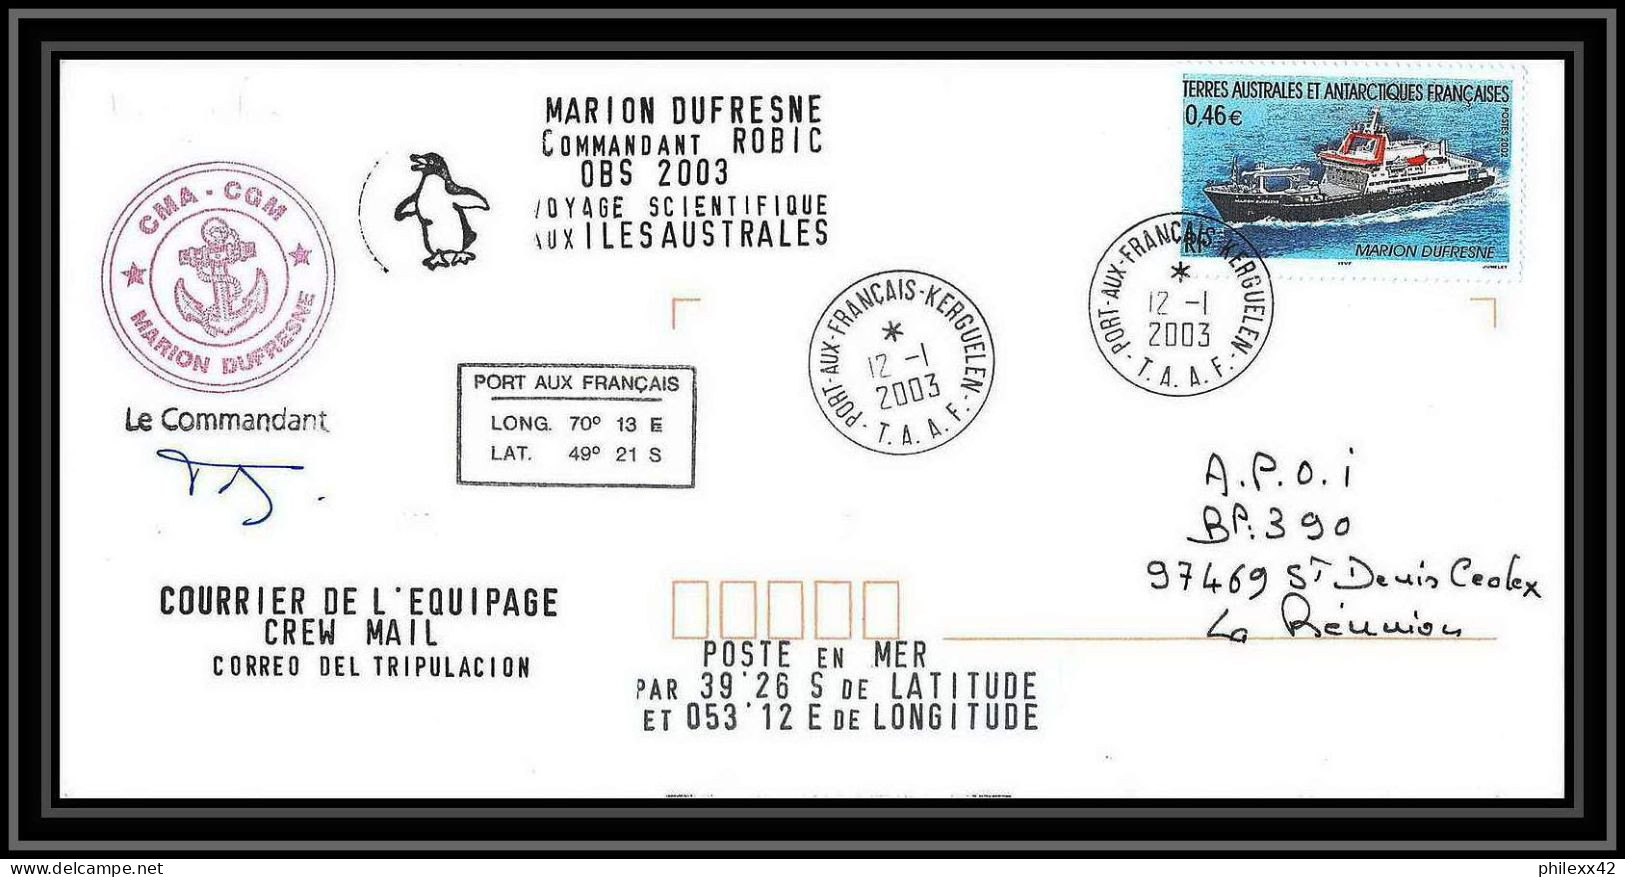 2389 ANTARCTIC Terres Australes TAAF Lettre Cover Dufresne 2 N°330 Obs 12/1/2003 Signé Signed - Antarktis-Expeditionen